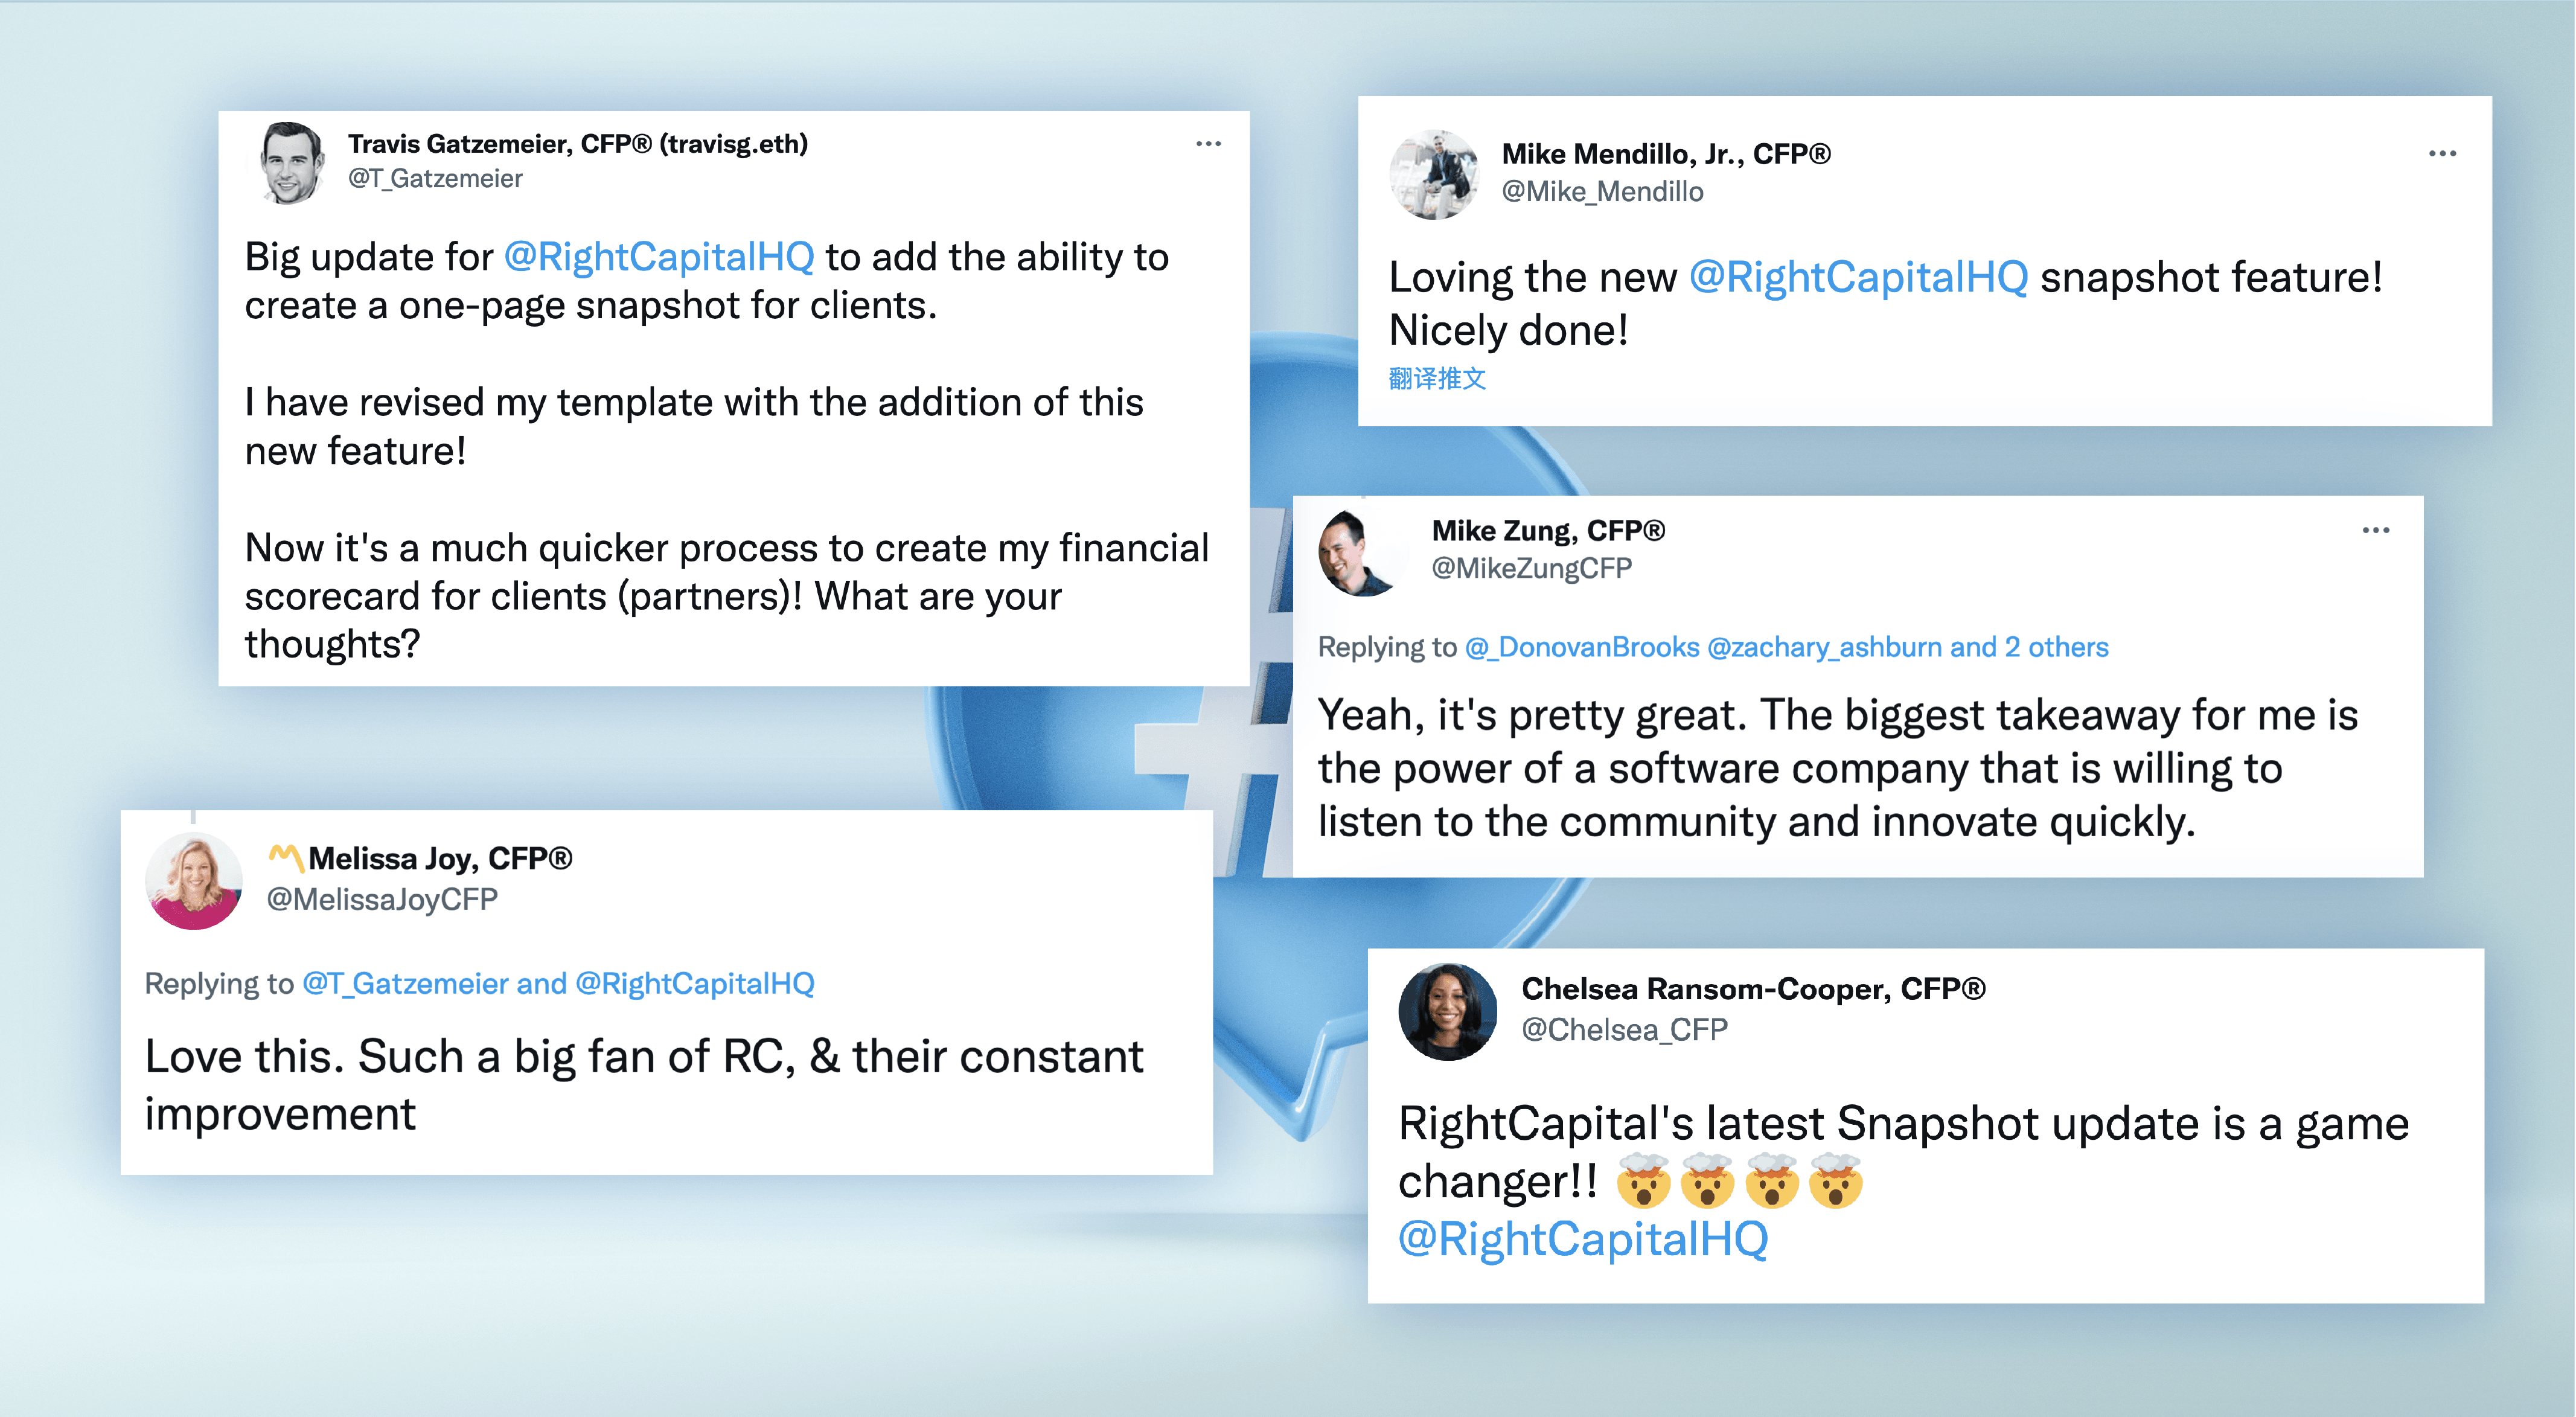 Praise for RightCapital's Snapshot feature on Twitter